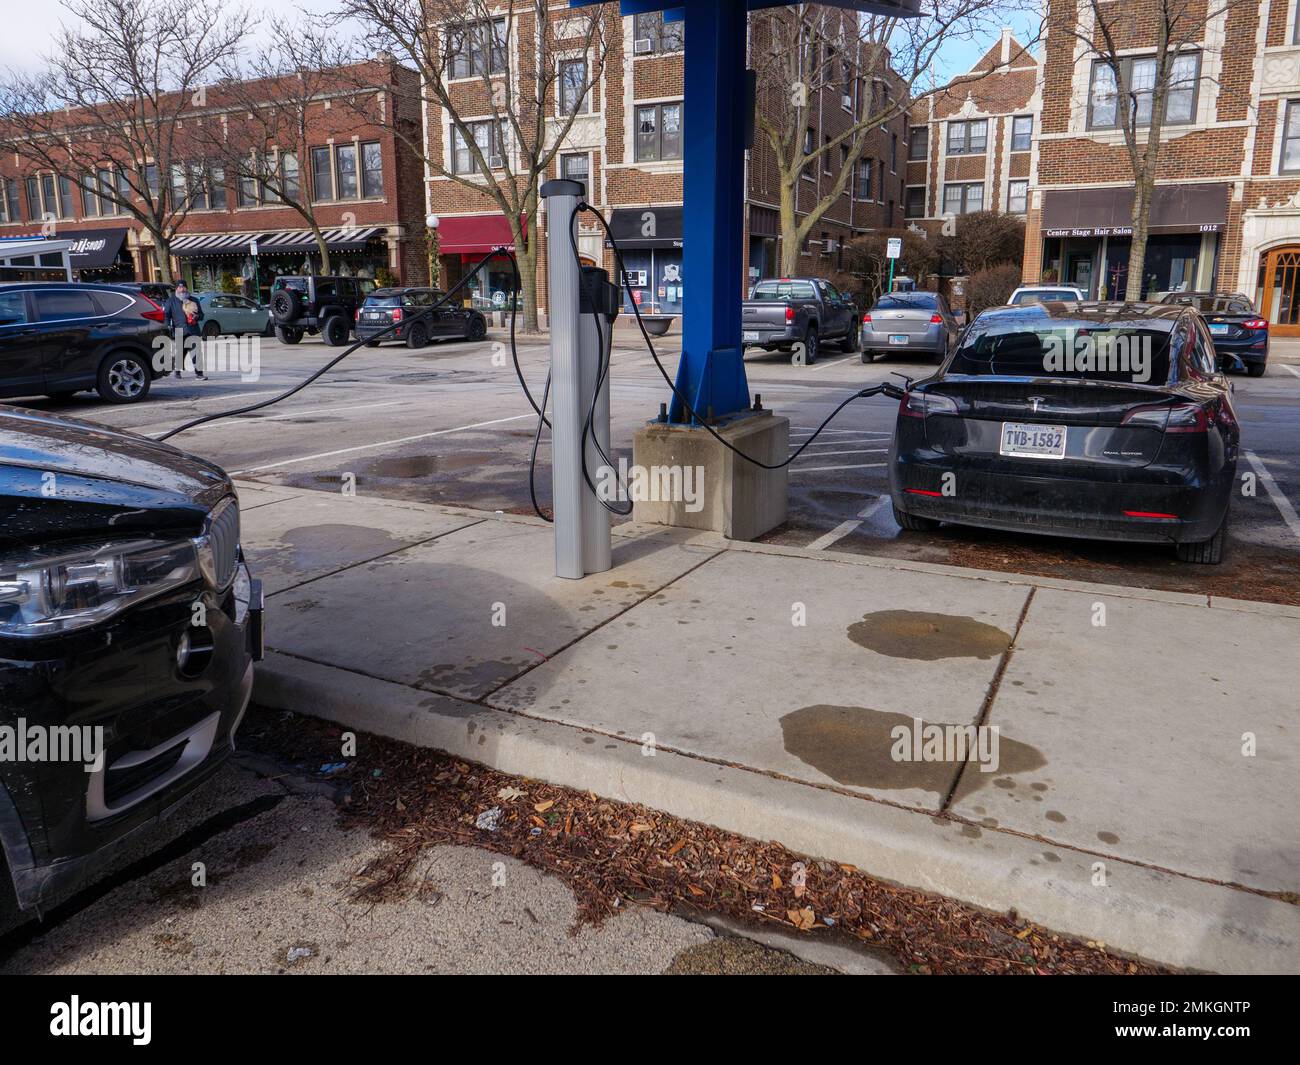 EV charging station with BMW  X5 plugin hybrid and Tesla Model 3 charging. Stock Photo